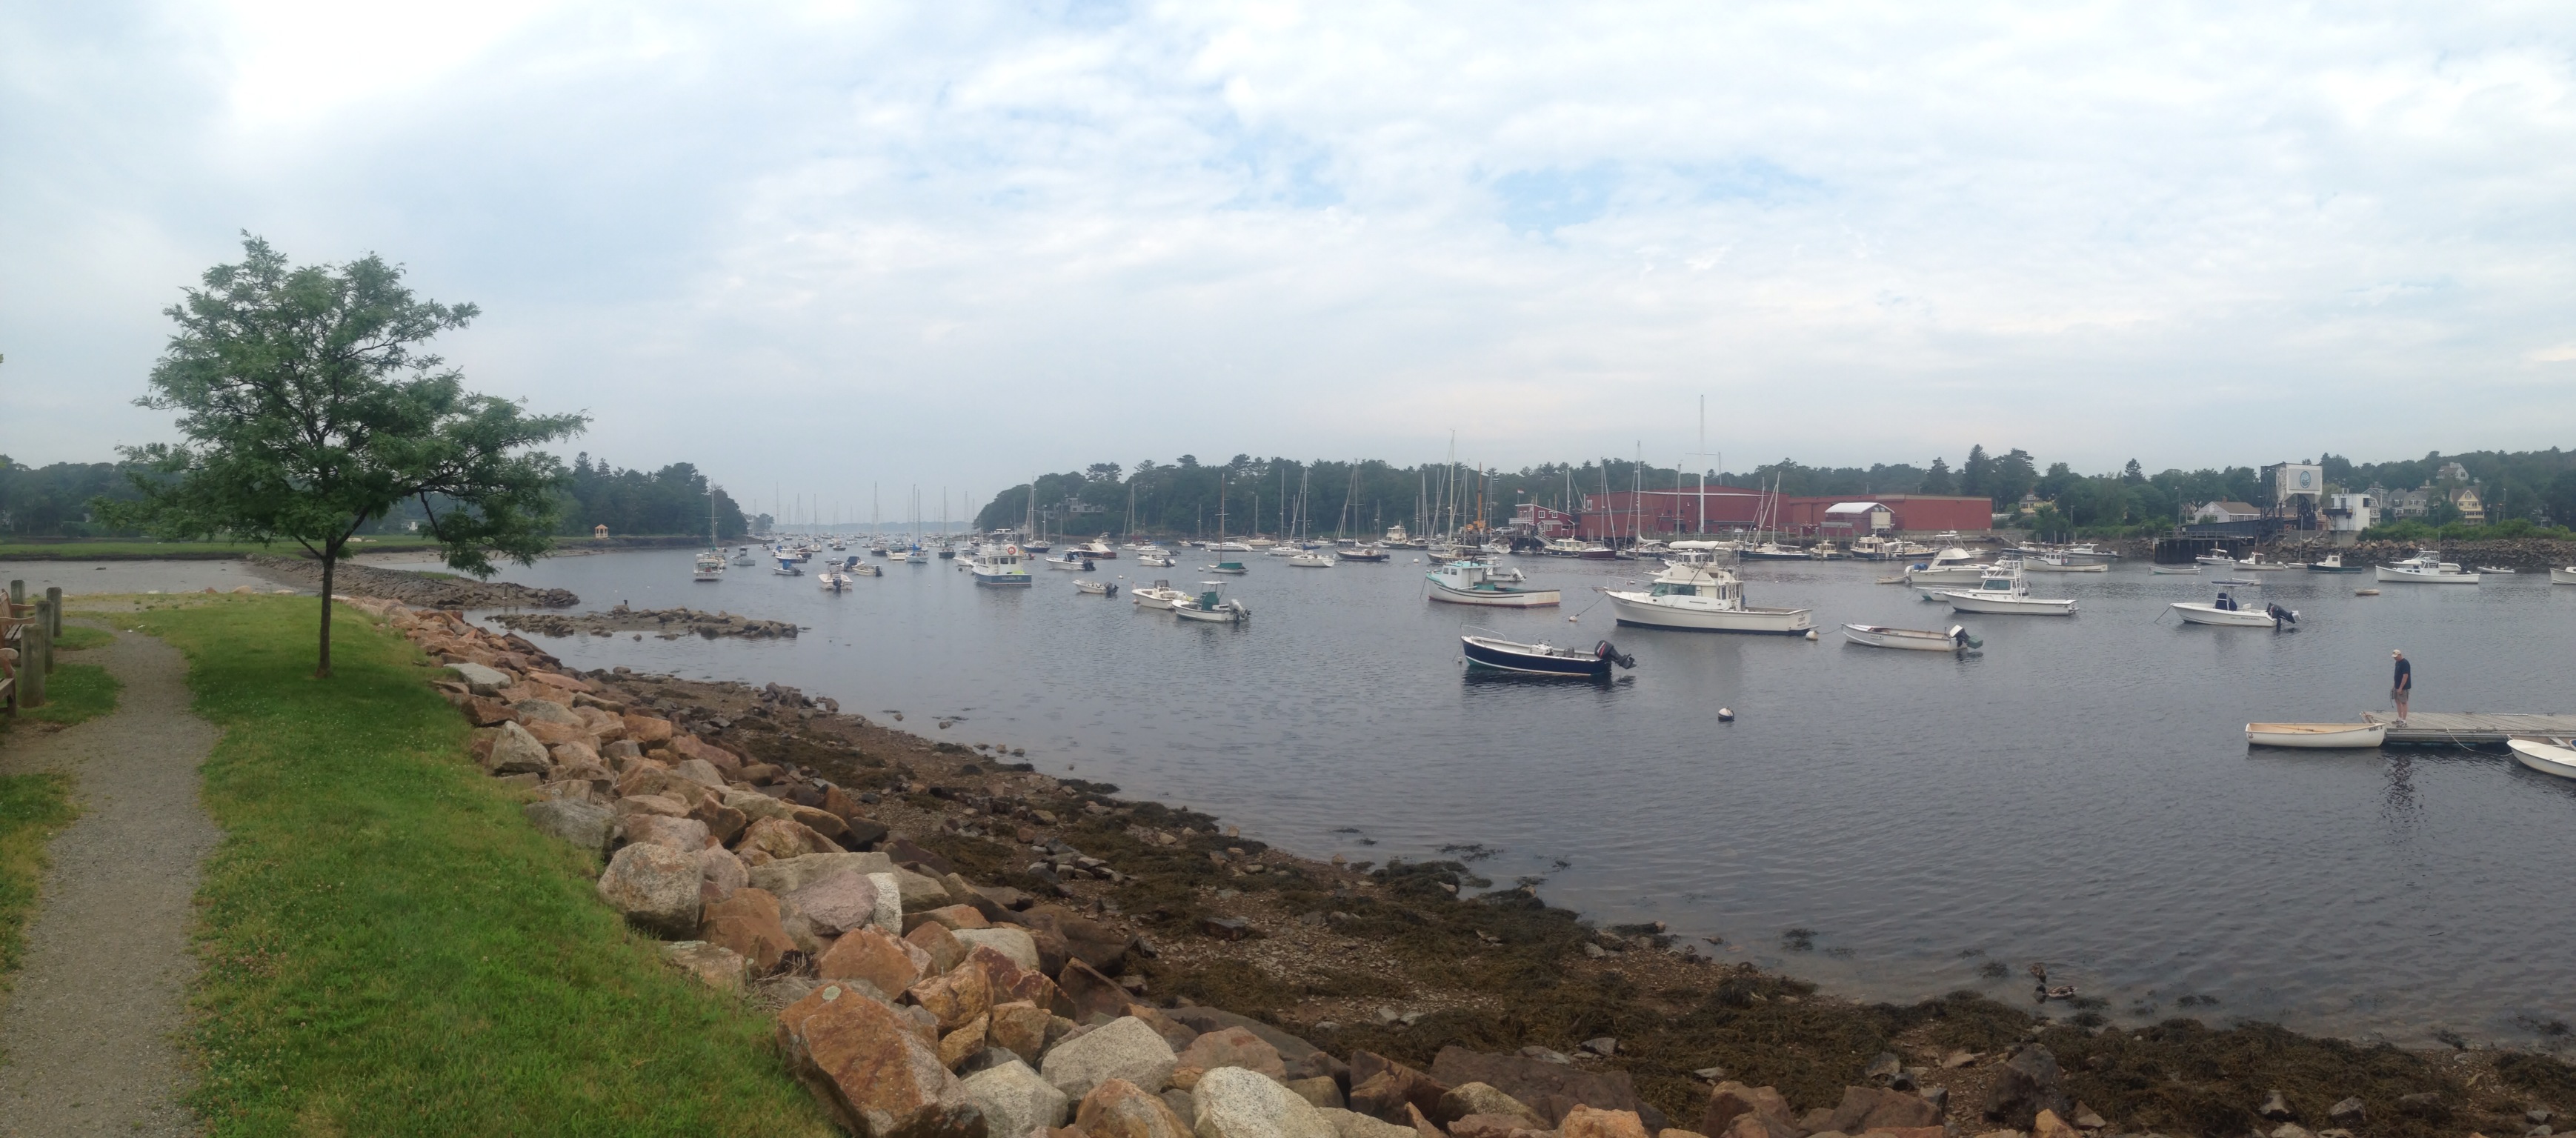 File:Manchester By The Sea Harbor - Manchester, Massachusetts.jpeg ...